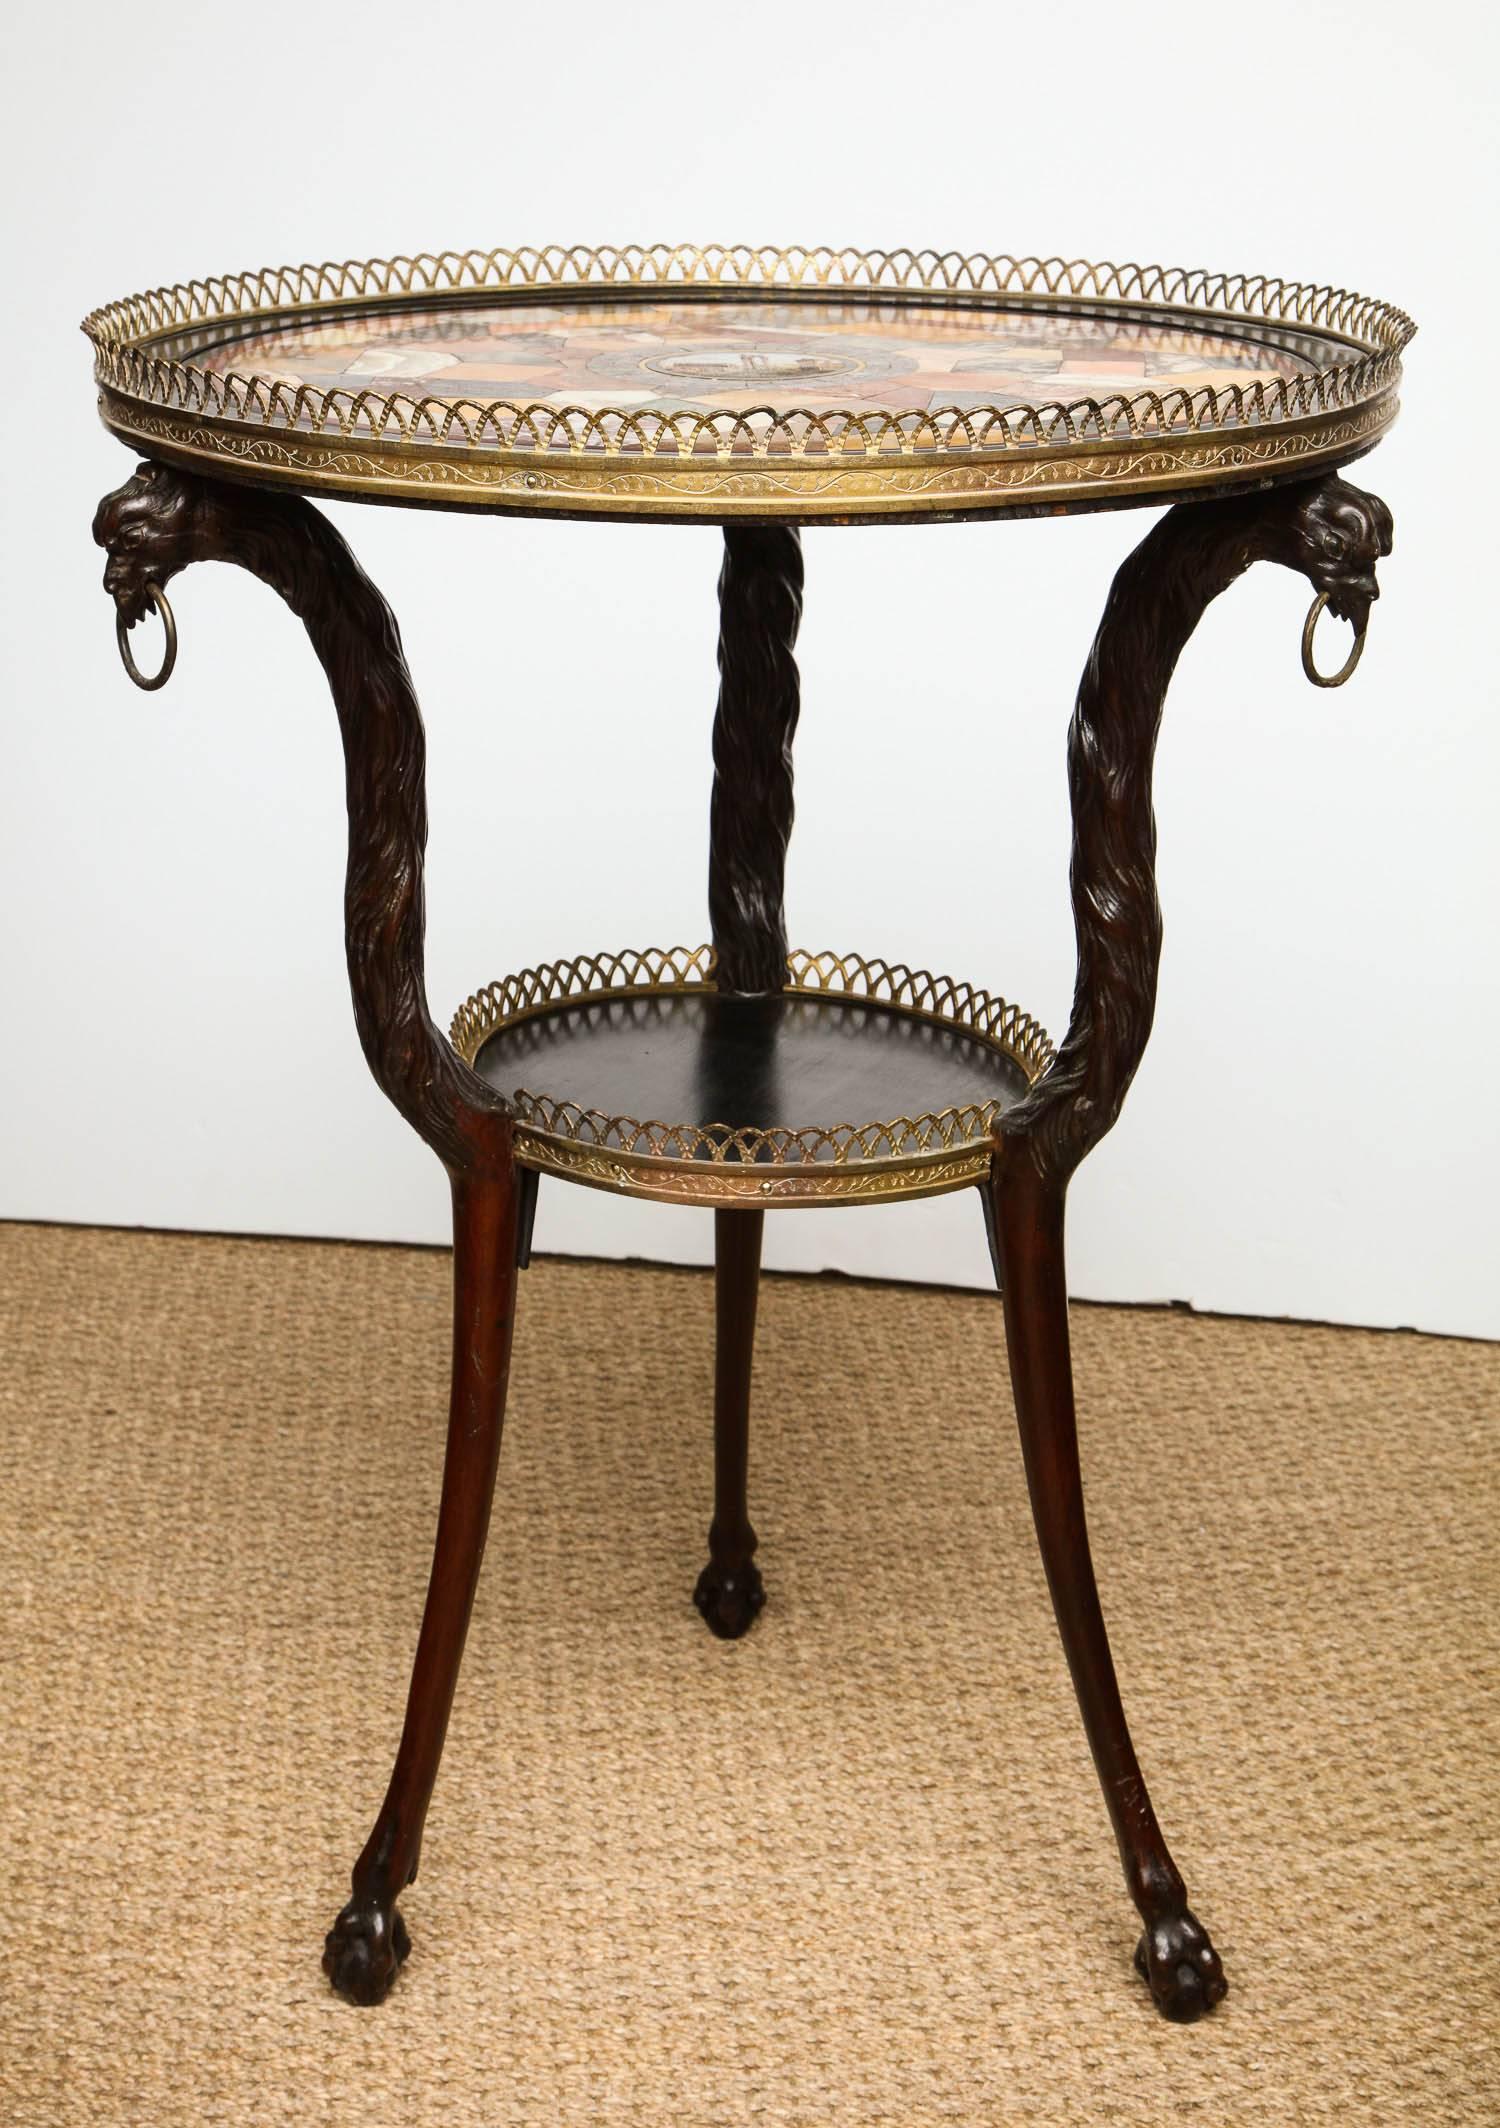 Very Fine Austrian Neoclassical gueridon table with gilt brass pierced gallery, the specimen marble top with Roman micro-mosaic center depicting ruins, having porphyry and malachite border, the body comprising random shaped specimen hardstones